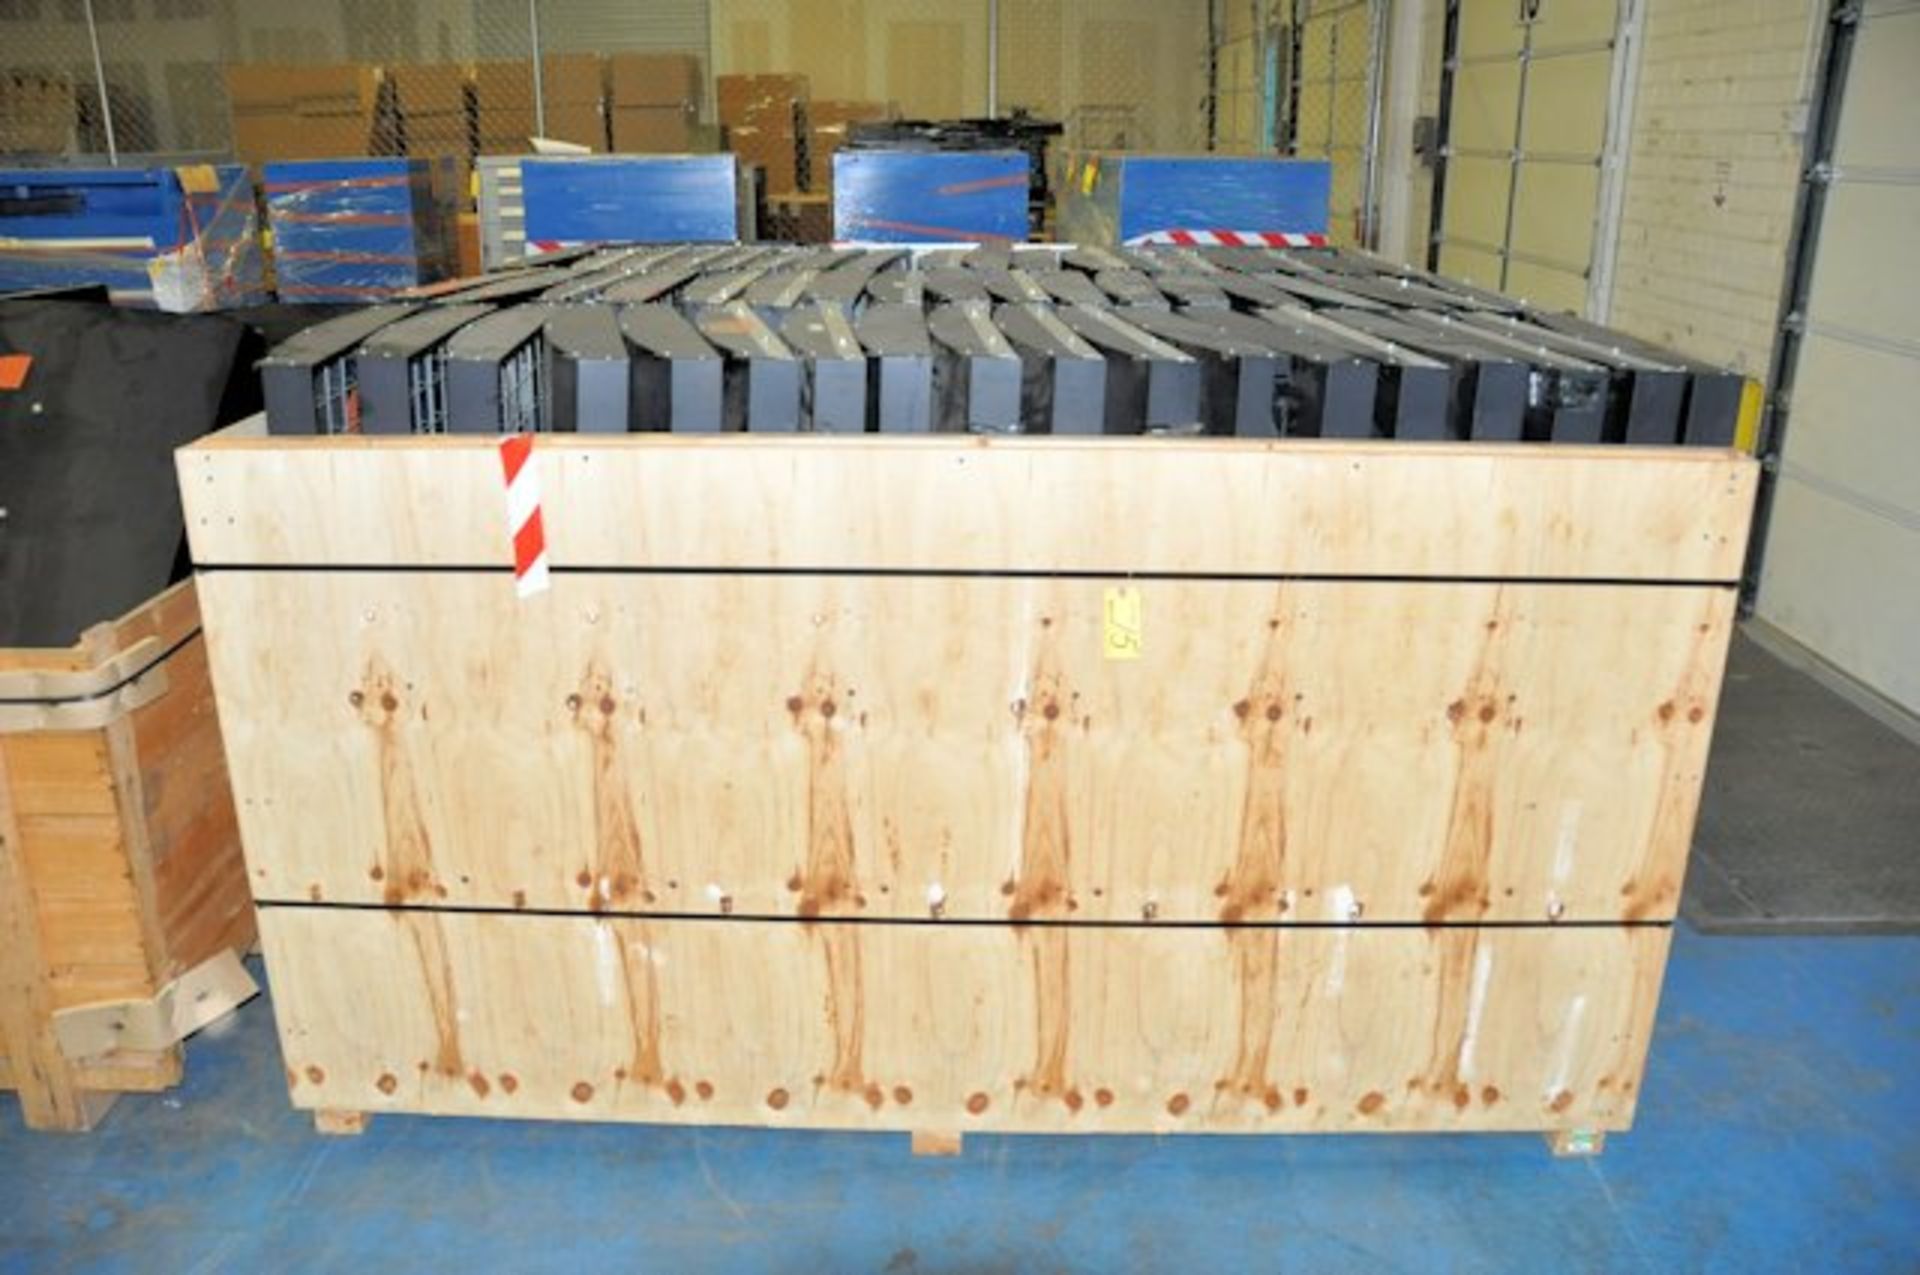 48'' x 8- TUBE FLUORESCENT LIGHT FIXTURE IN [1] CRATE